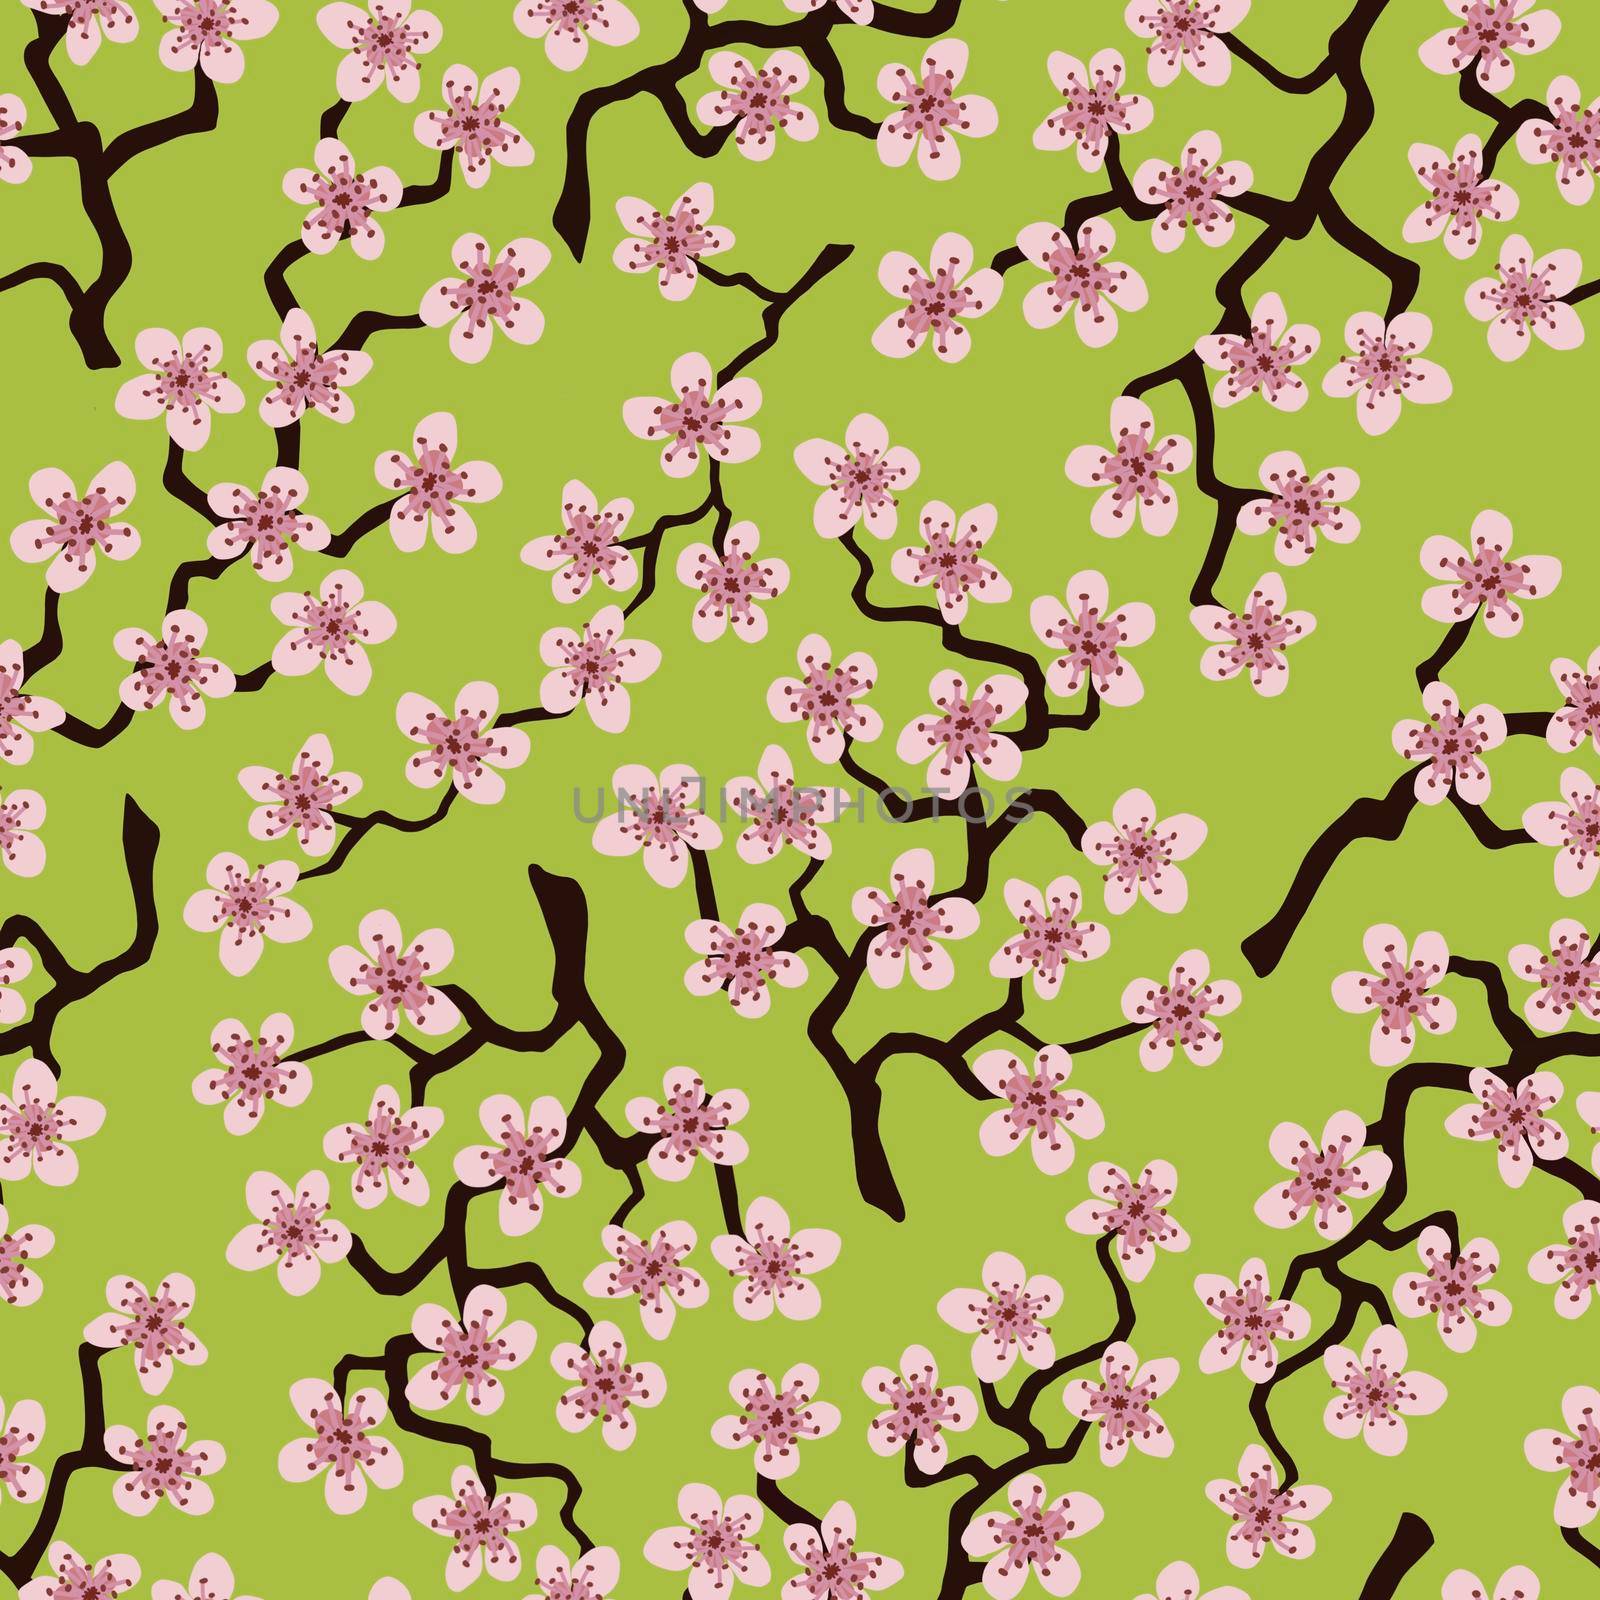 Seamless pattern with blossoming Japanese cherry sakura branches for fabric,packaging,wallpaper,textile decor,design, invitations,cards,print,gift wrap,manufacturing.Pink flowers on mustard background